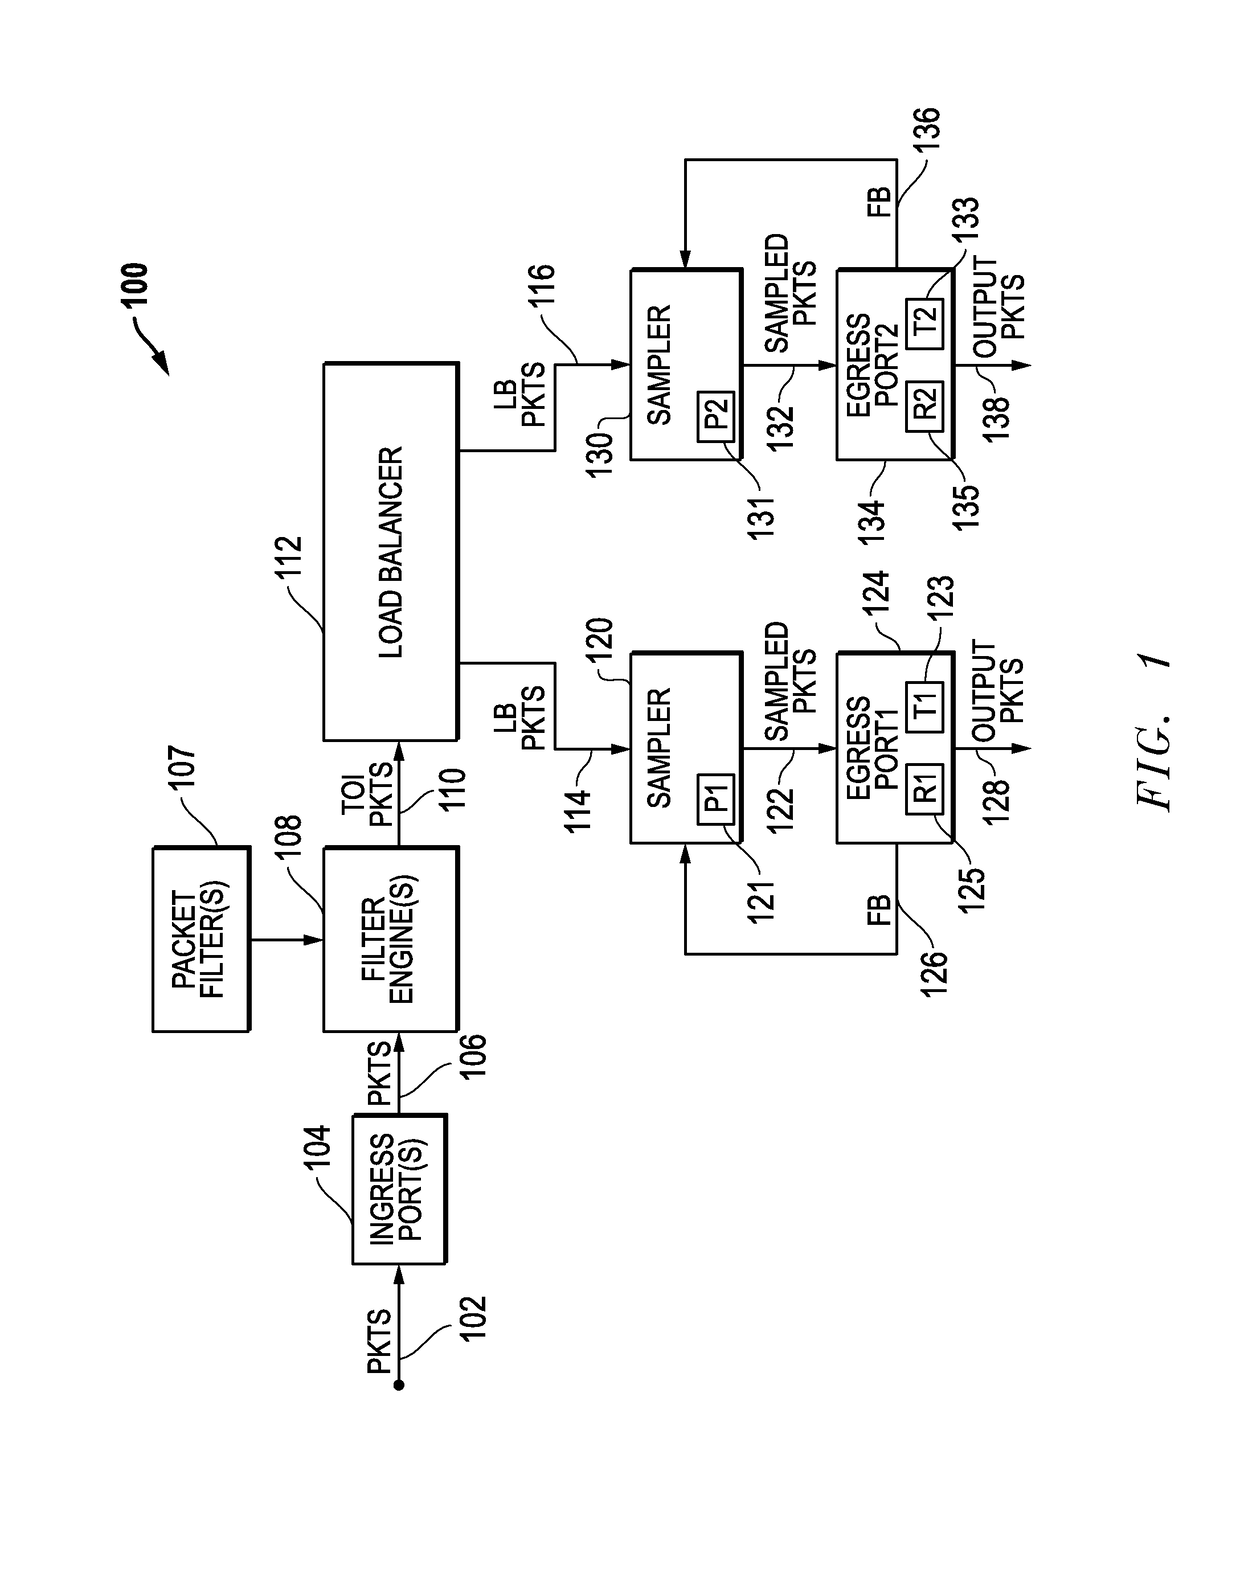 Egress Port Overload Protection For Network Packet Forwarding Systems